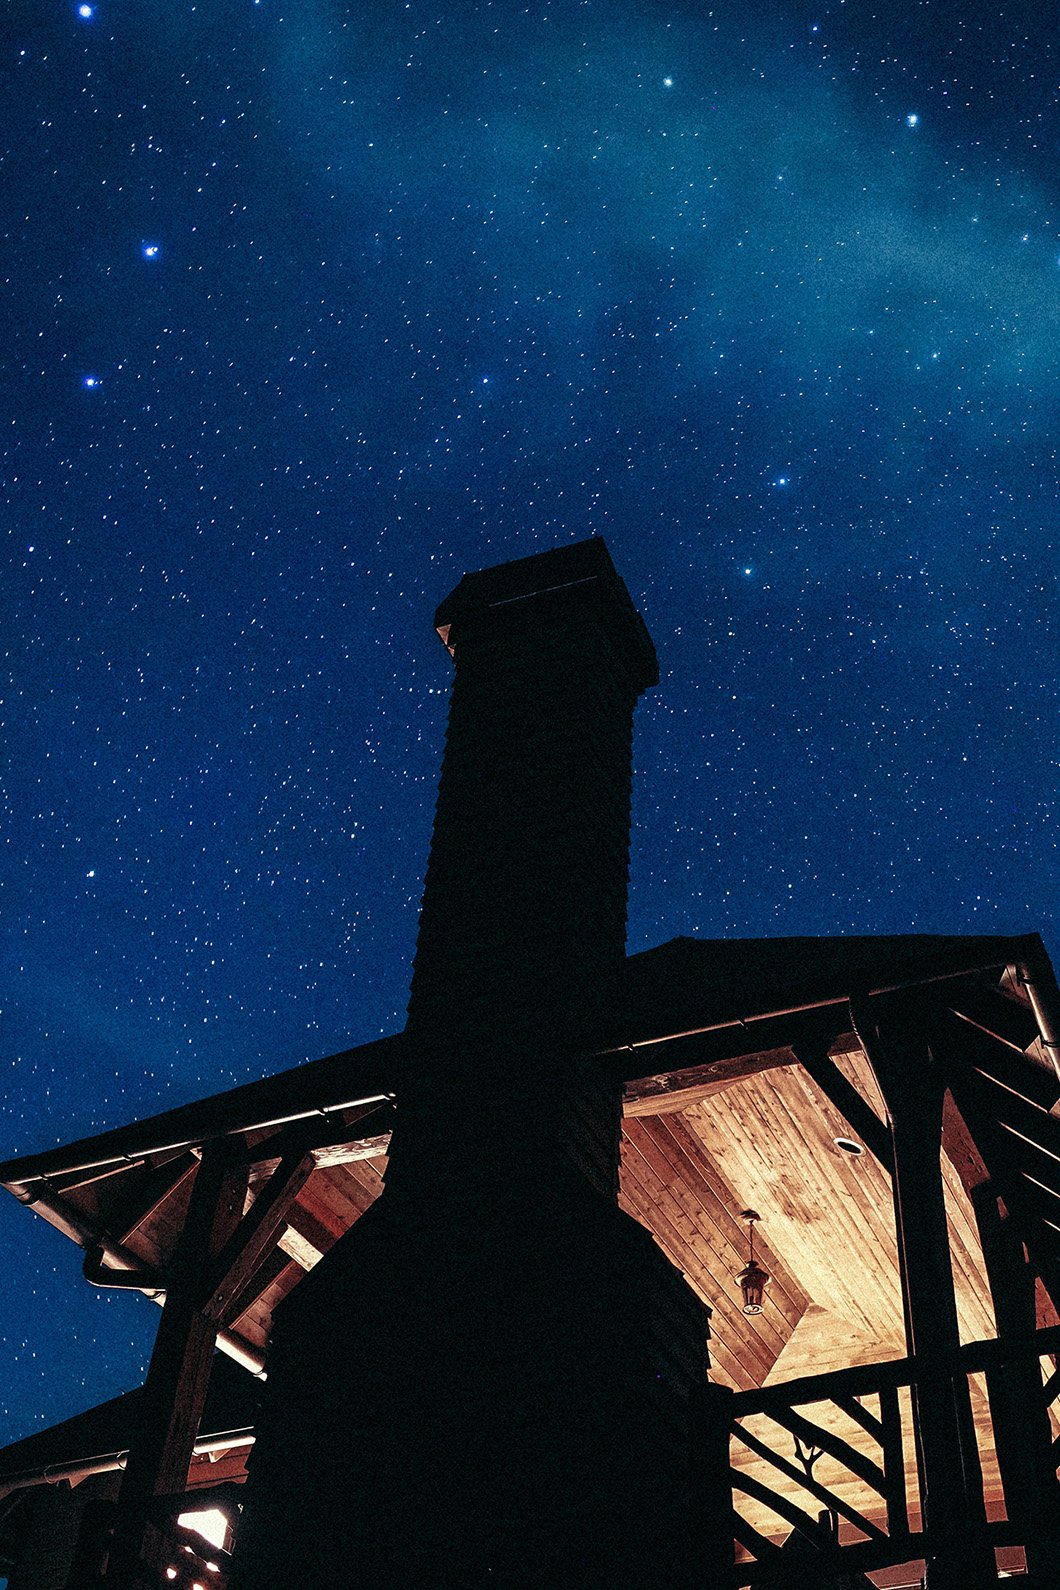 chimney shown at night with stars in background